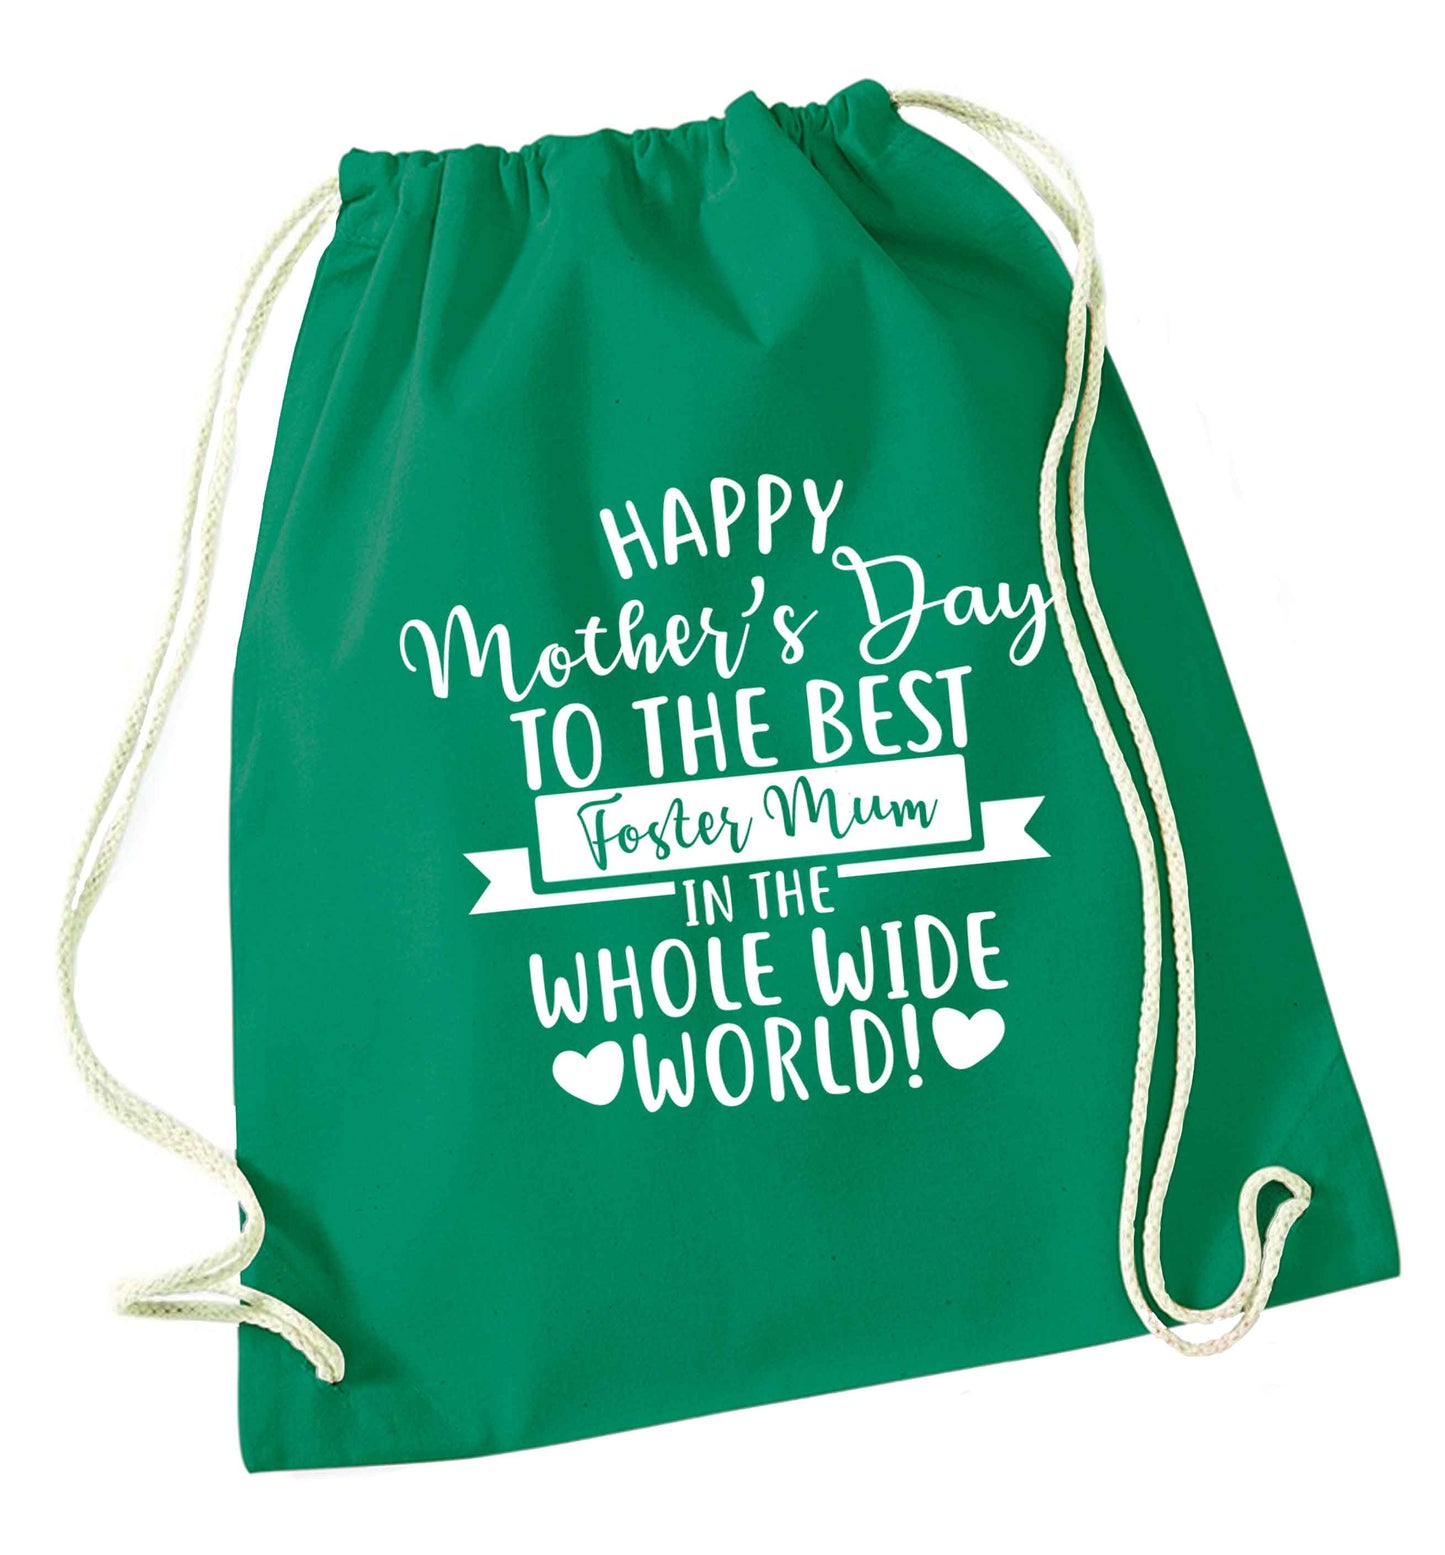 Happy mother's day to the best foster mum in the world green drawstring bag